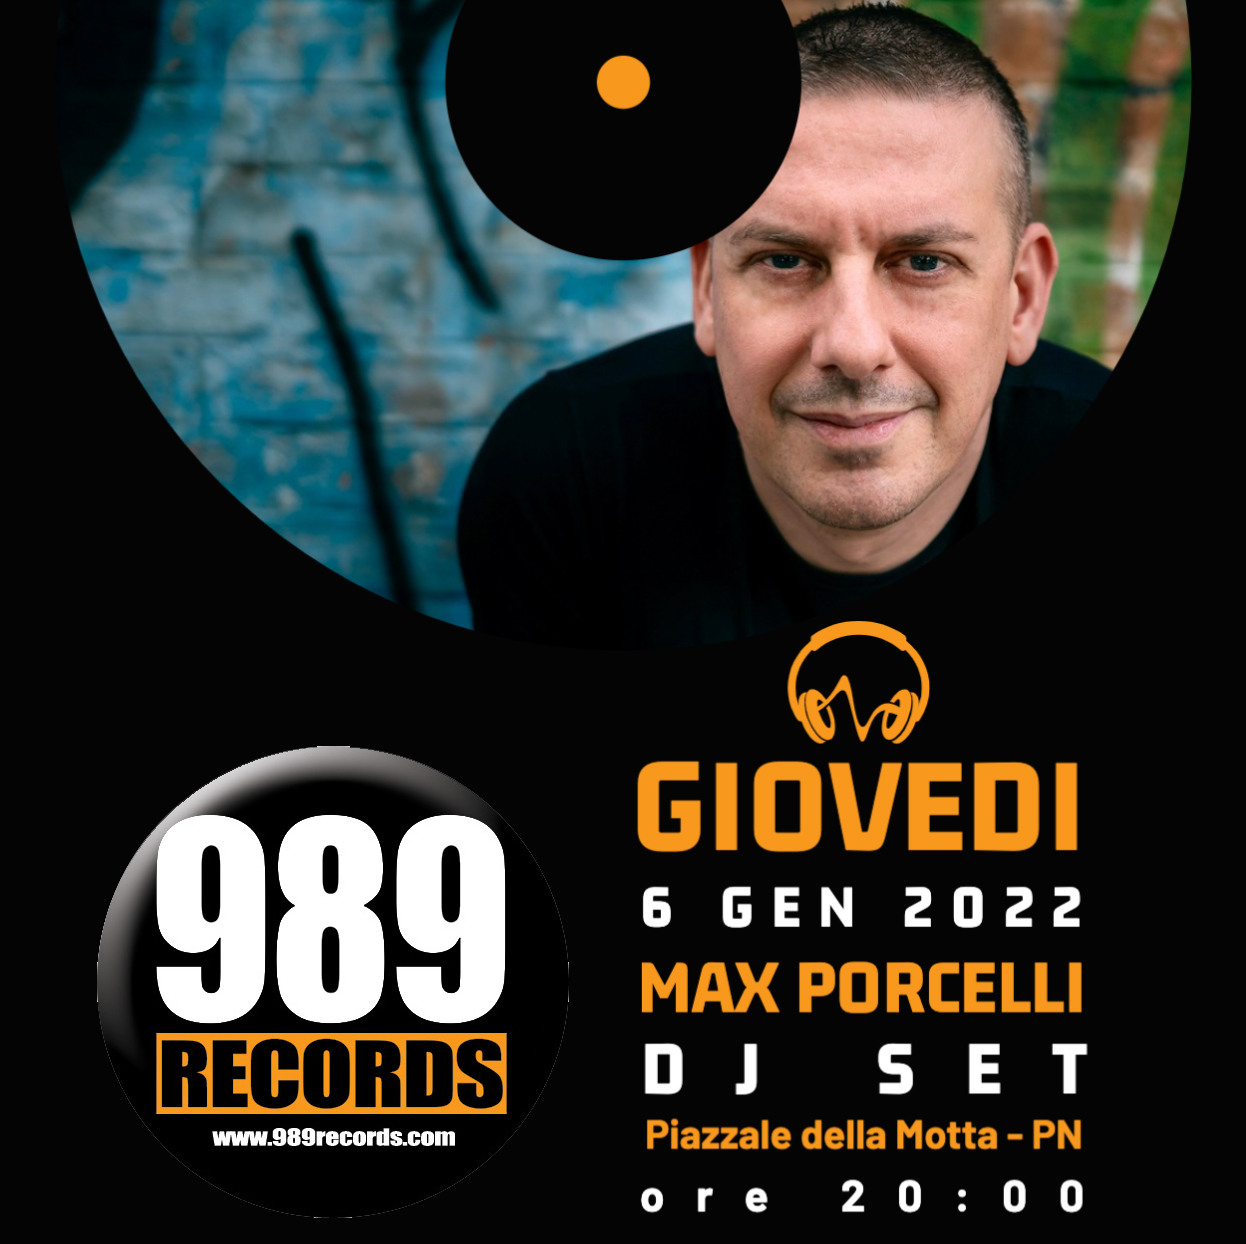 Max Porcelli DJ Set II Act @ Casette Natale 2022 Open Air DJ Set - Pordenone | House and Electronic Music Since 2007.